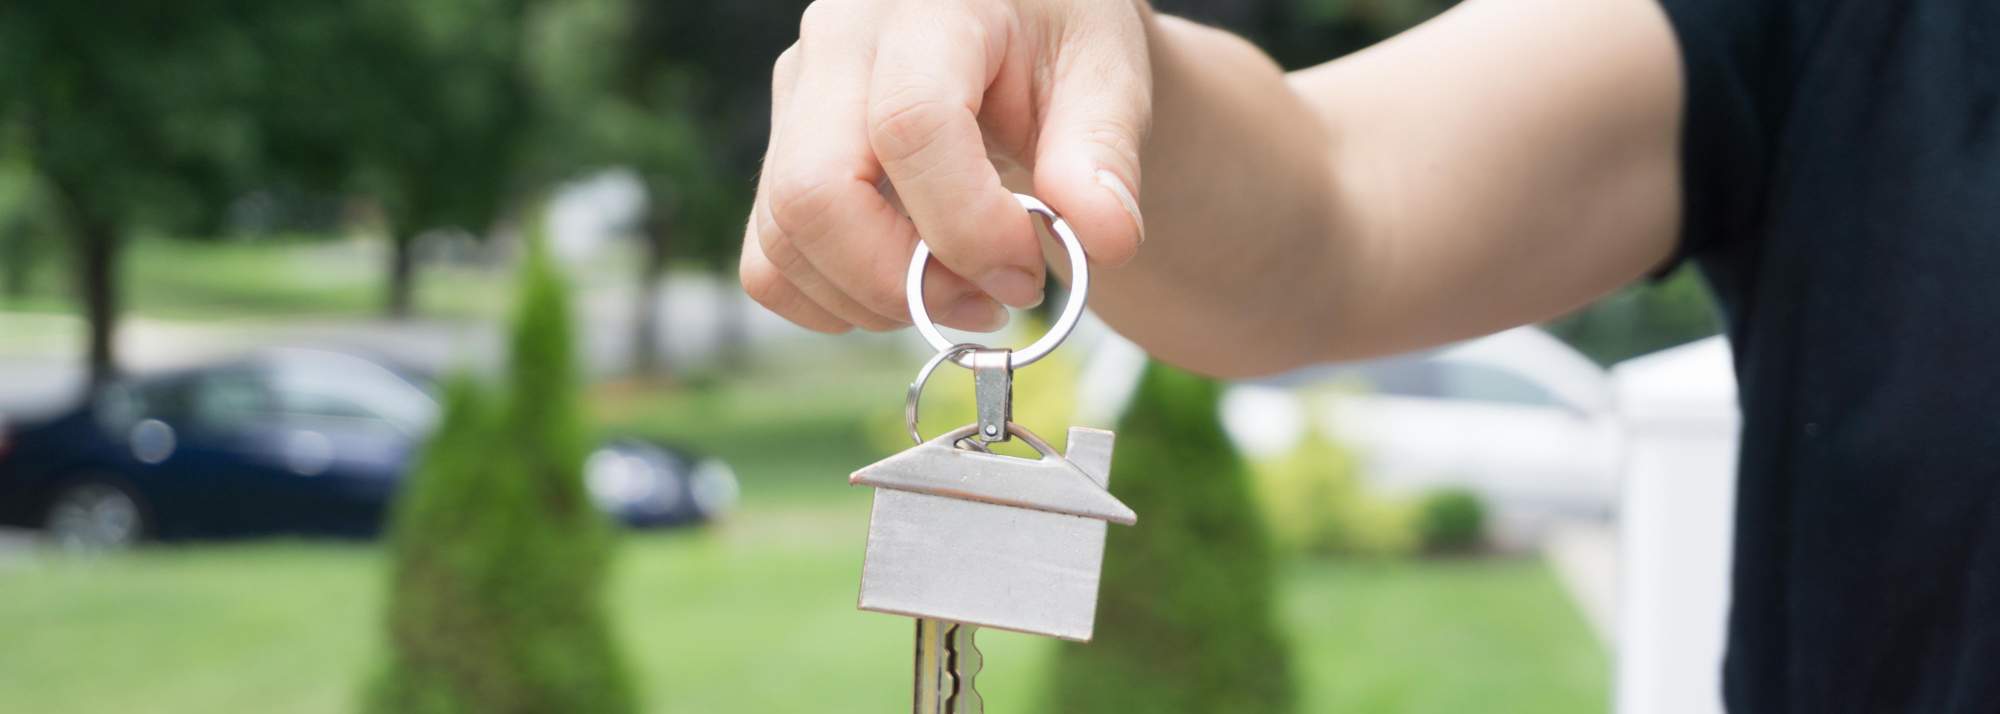 Keys to your first home